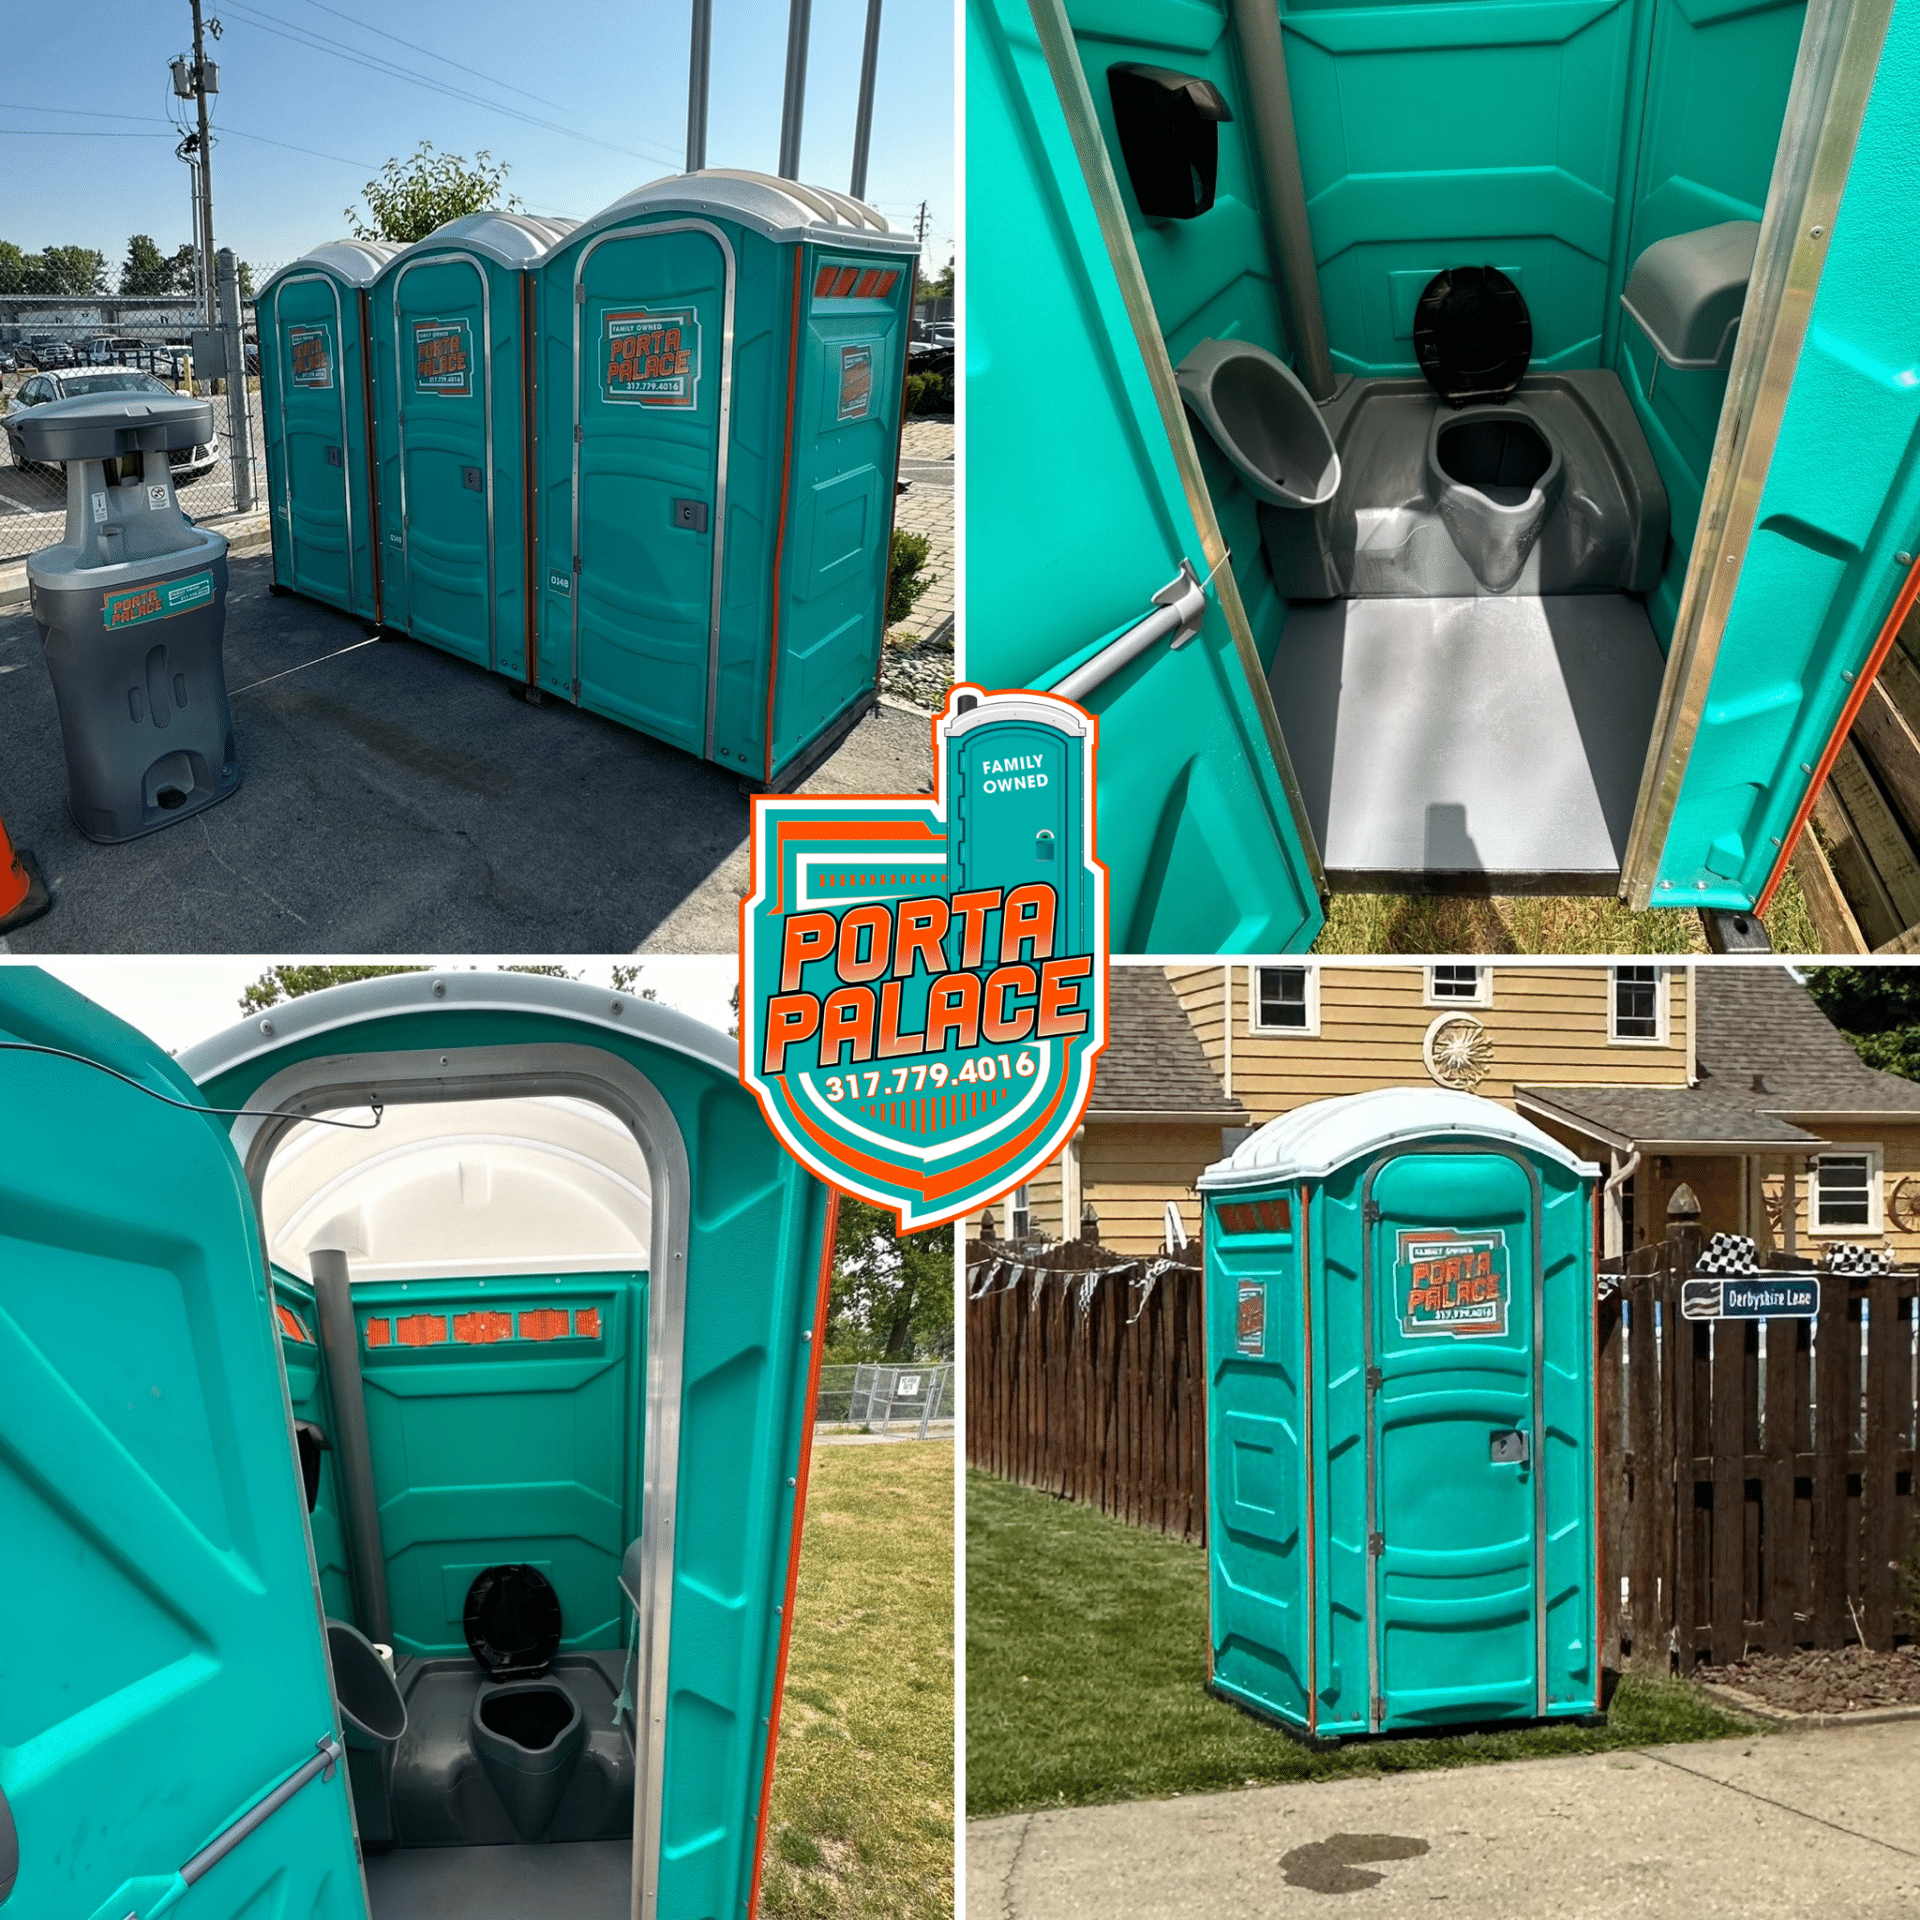 Porta Palace Portable Restrooms in Indianapolis